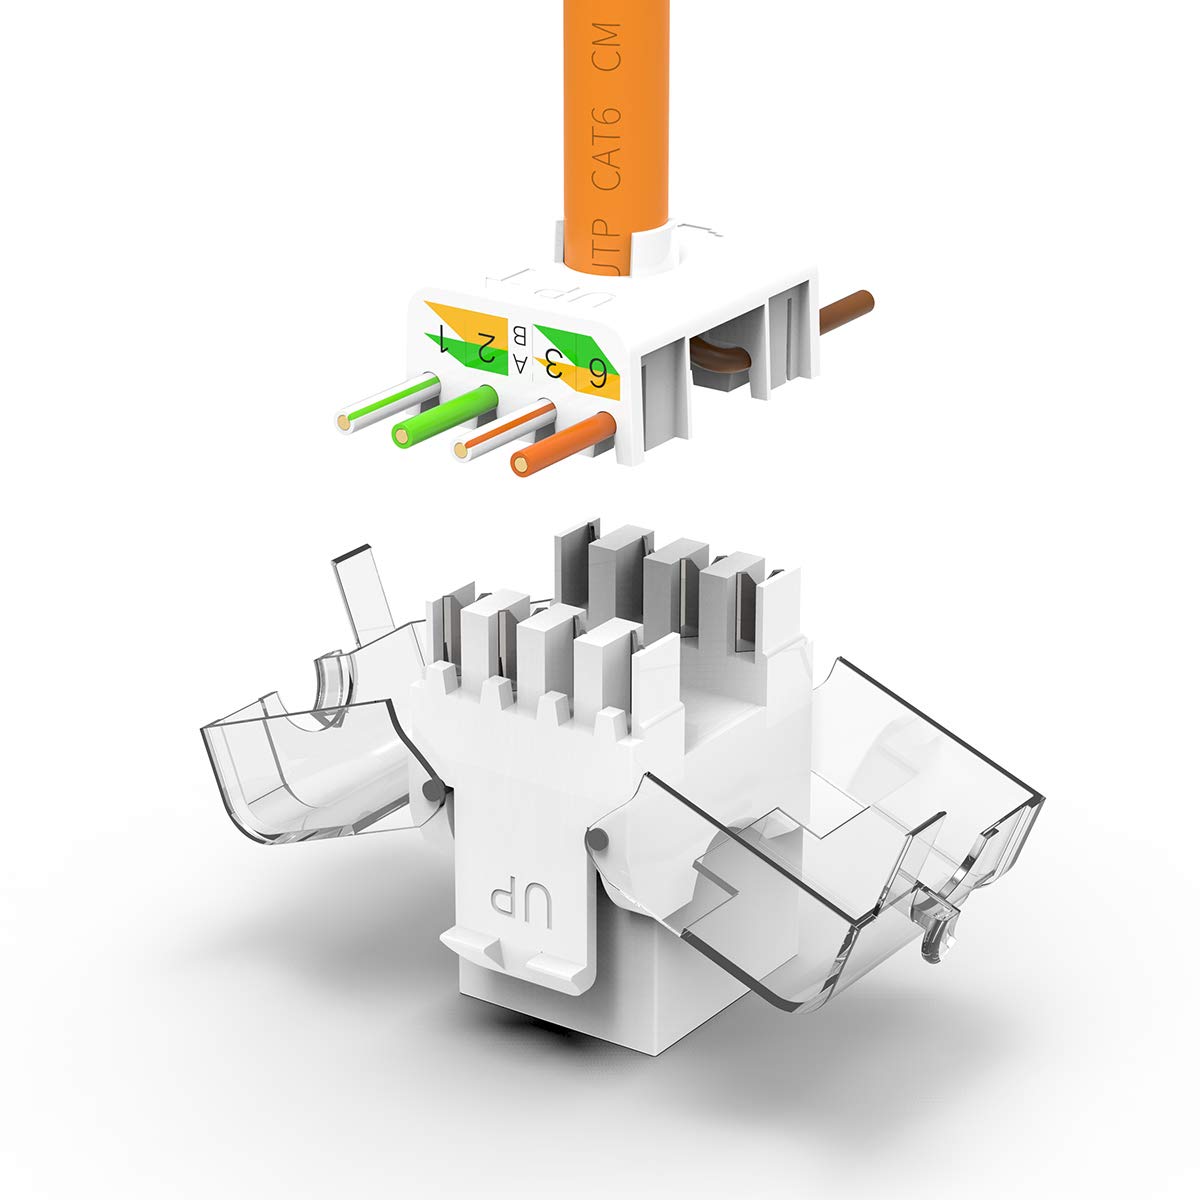 AMPCOM CAT6 Tool-Less RJ45 UTP Keystone Jack, No Punch-Down Tool Required Module Coupler -10 Pack White